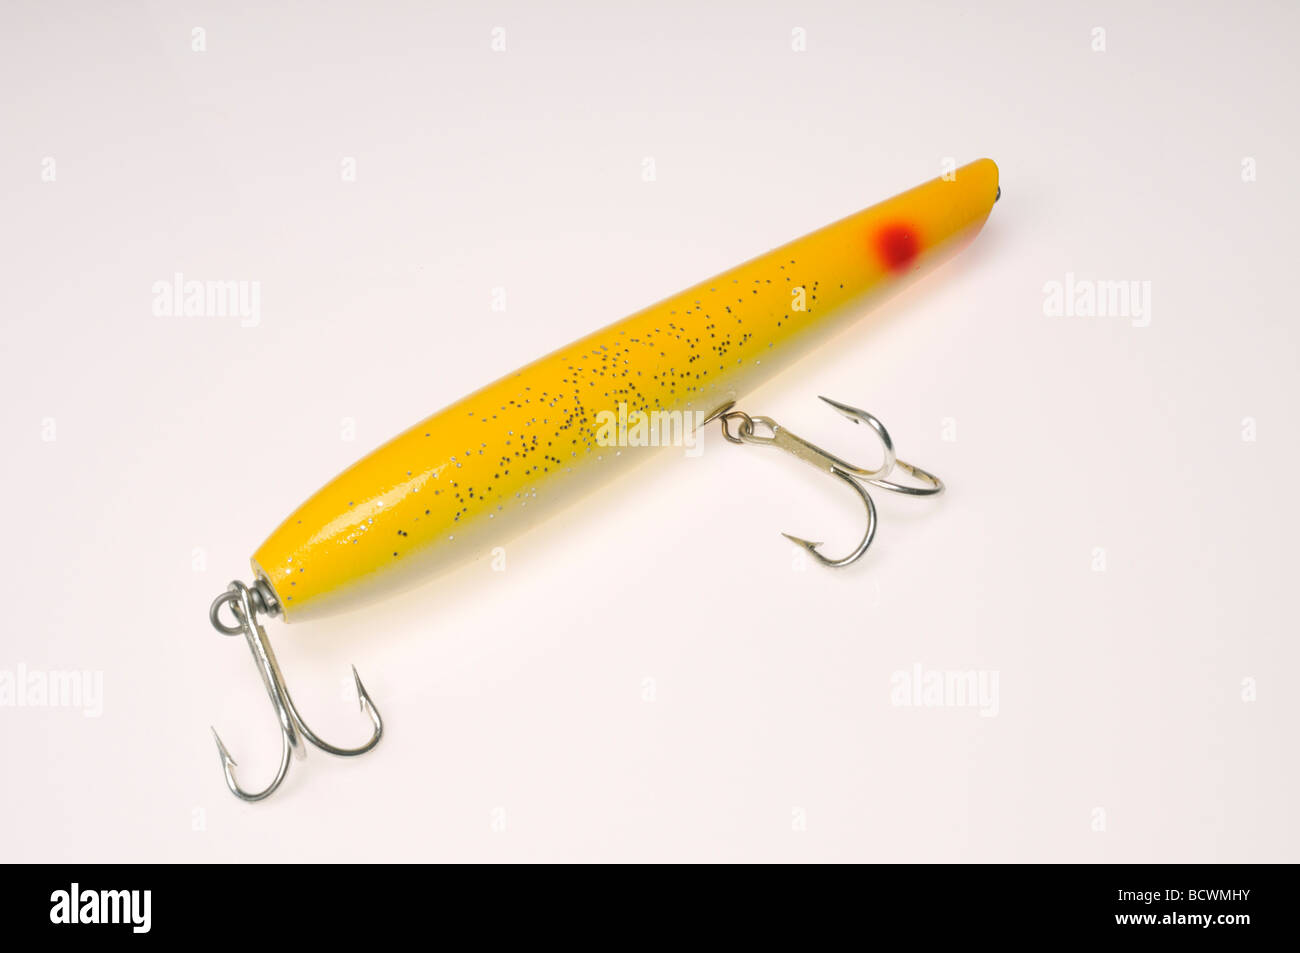 Fishing lure for saltwater with treble hooks Stock Photo - Alamy